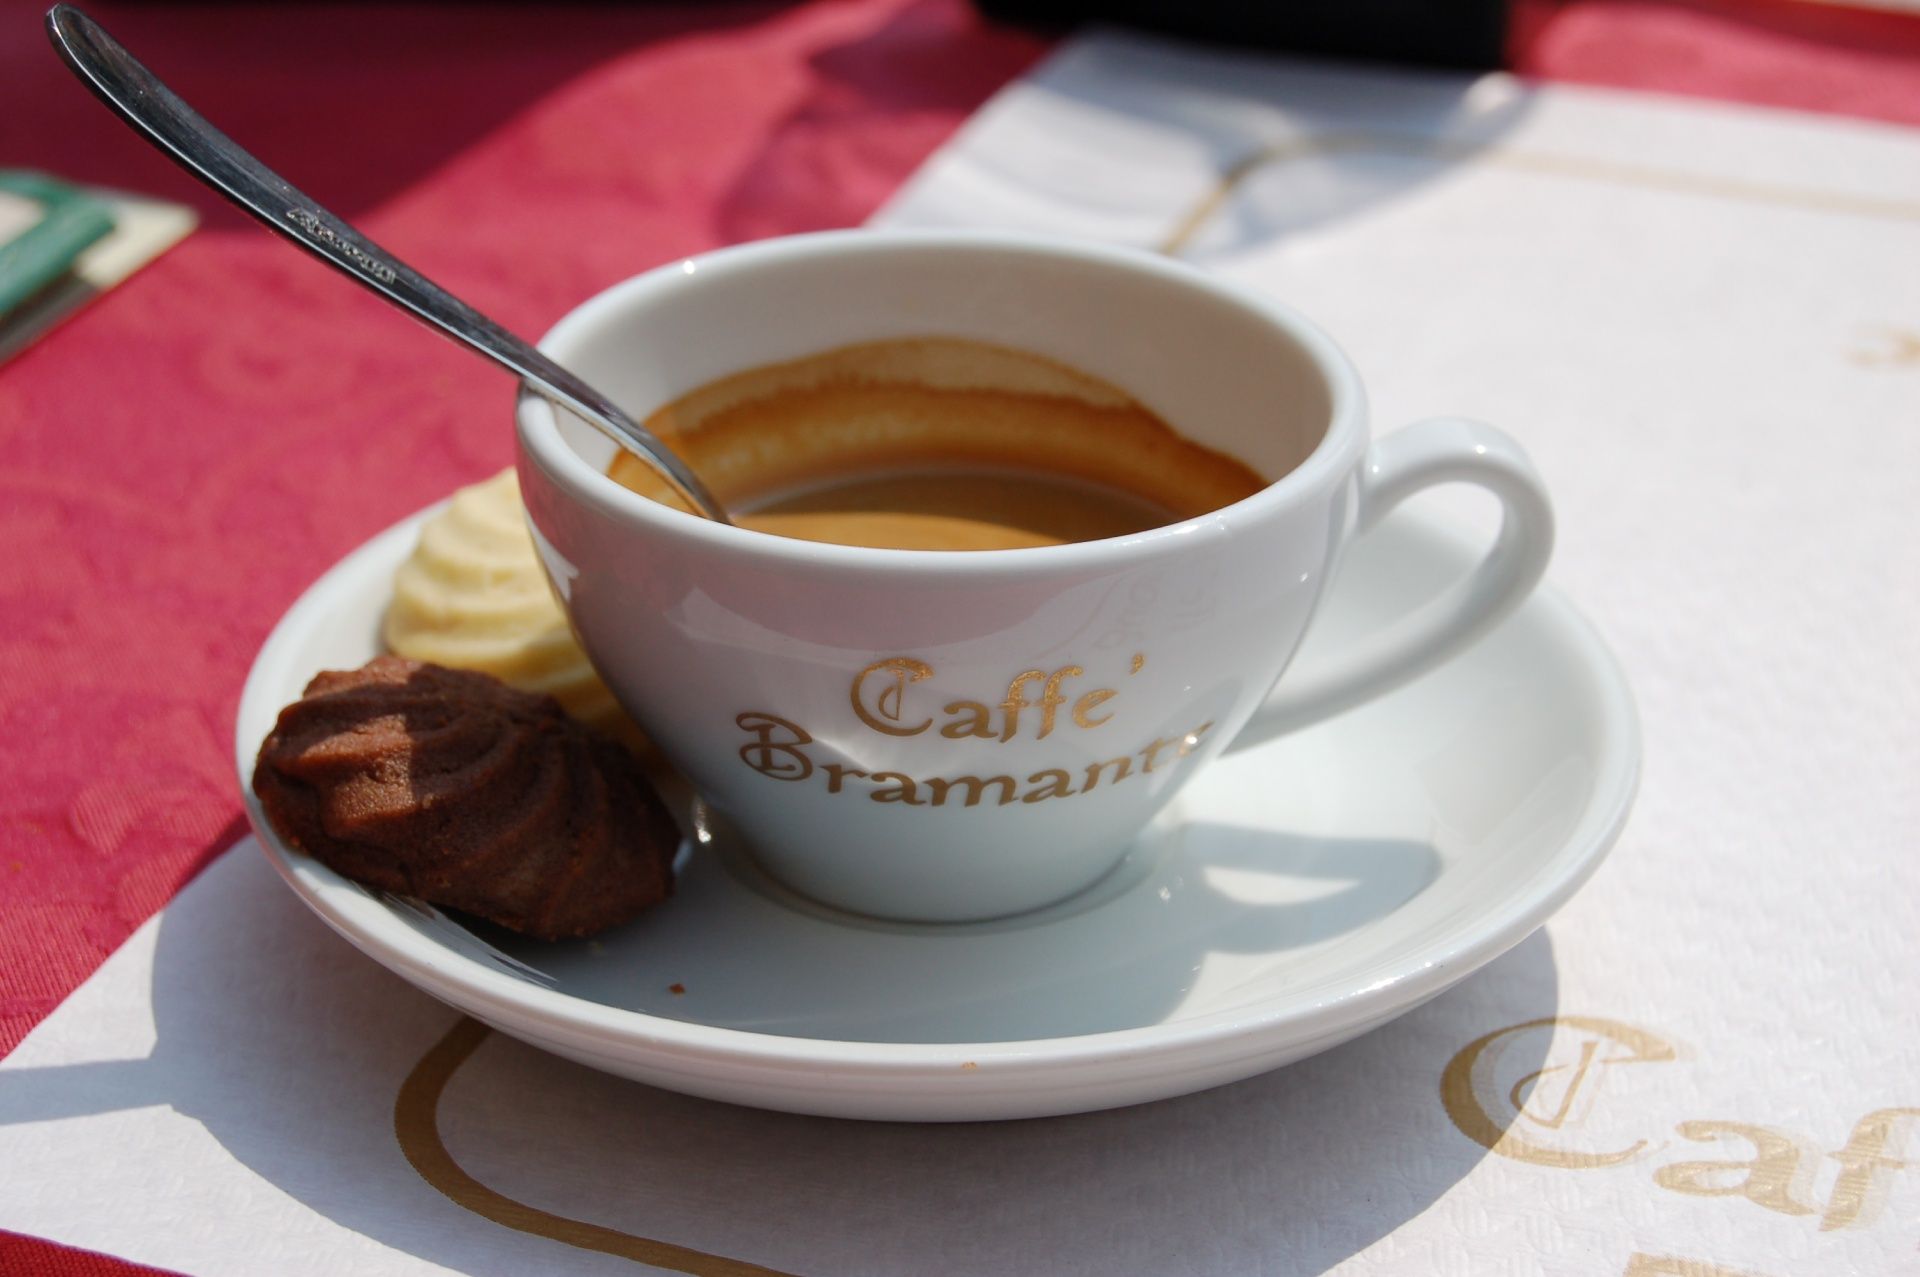 A Caffè, or short black, is often served in Italy with some yummy biscuits or a small chocolate!